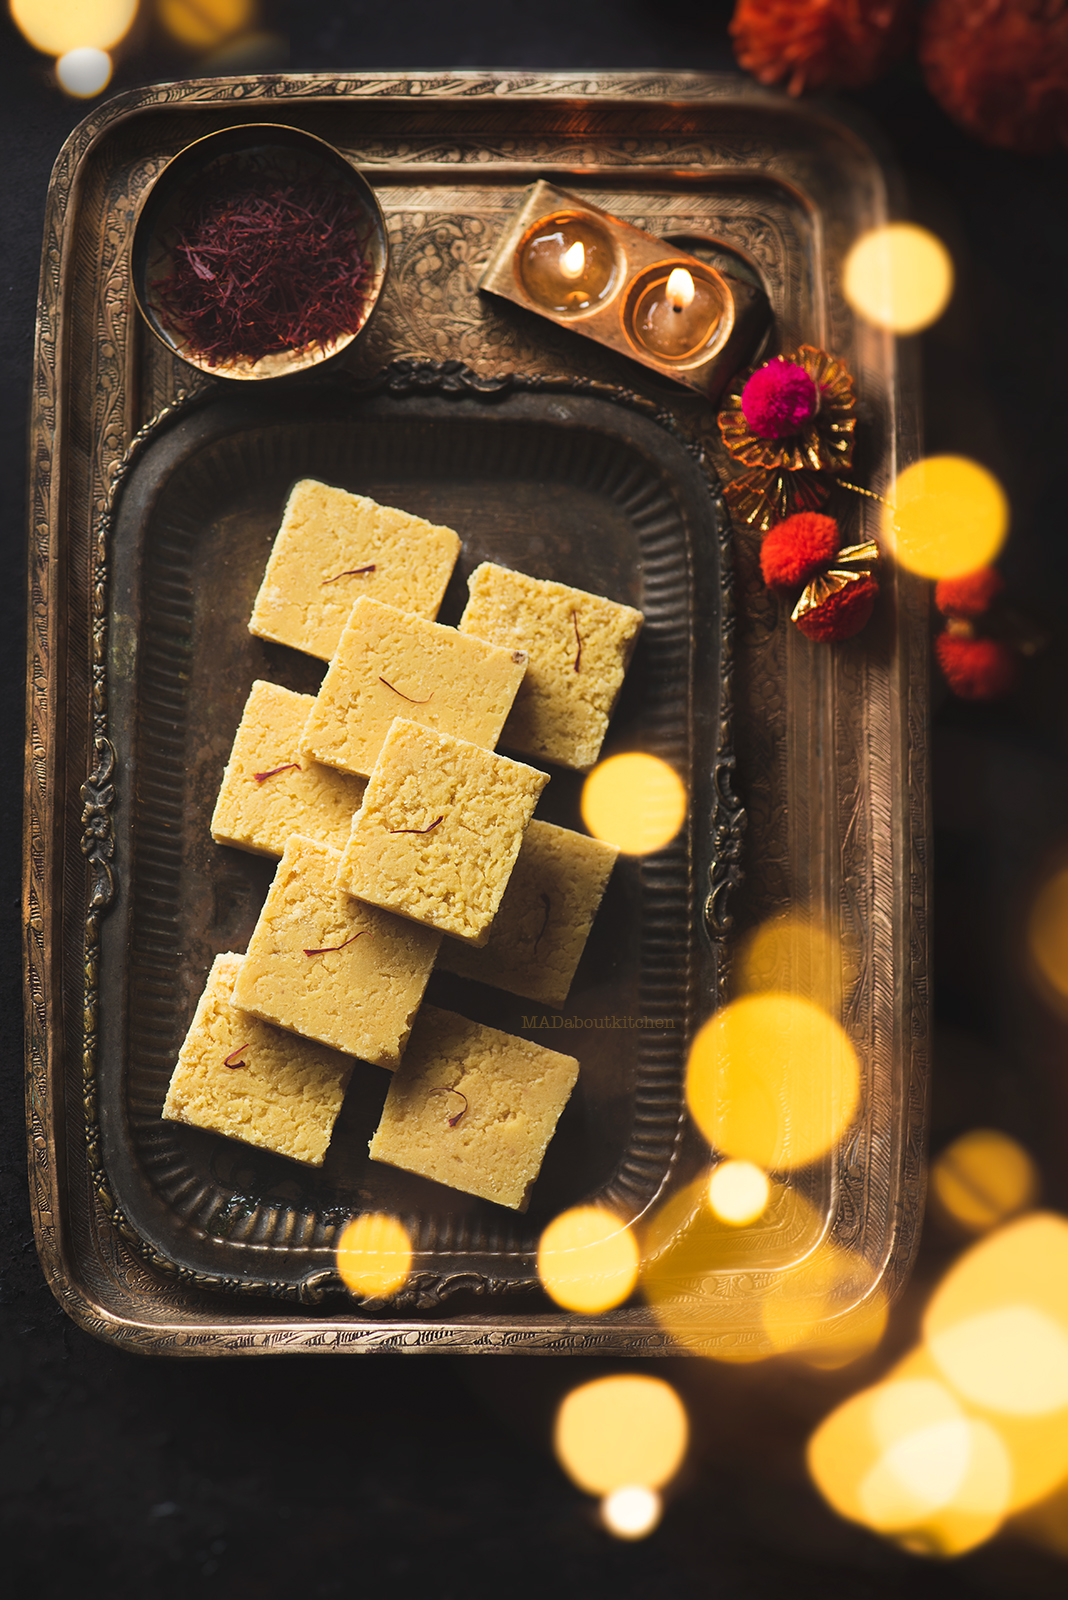 7 cups barfi is made using 7 cups of ingredients using Besan.Besan mithai is a simple, easy mithai to make for any festival.